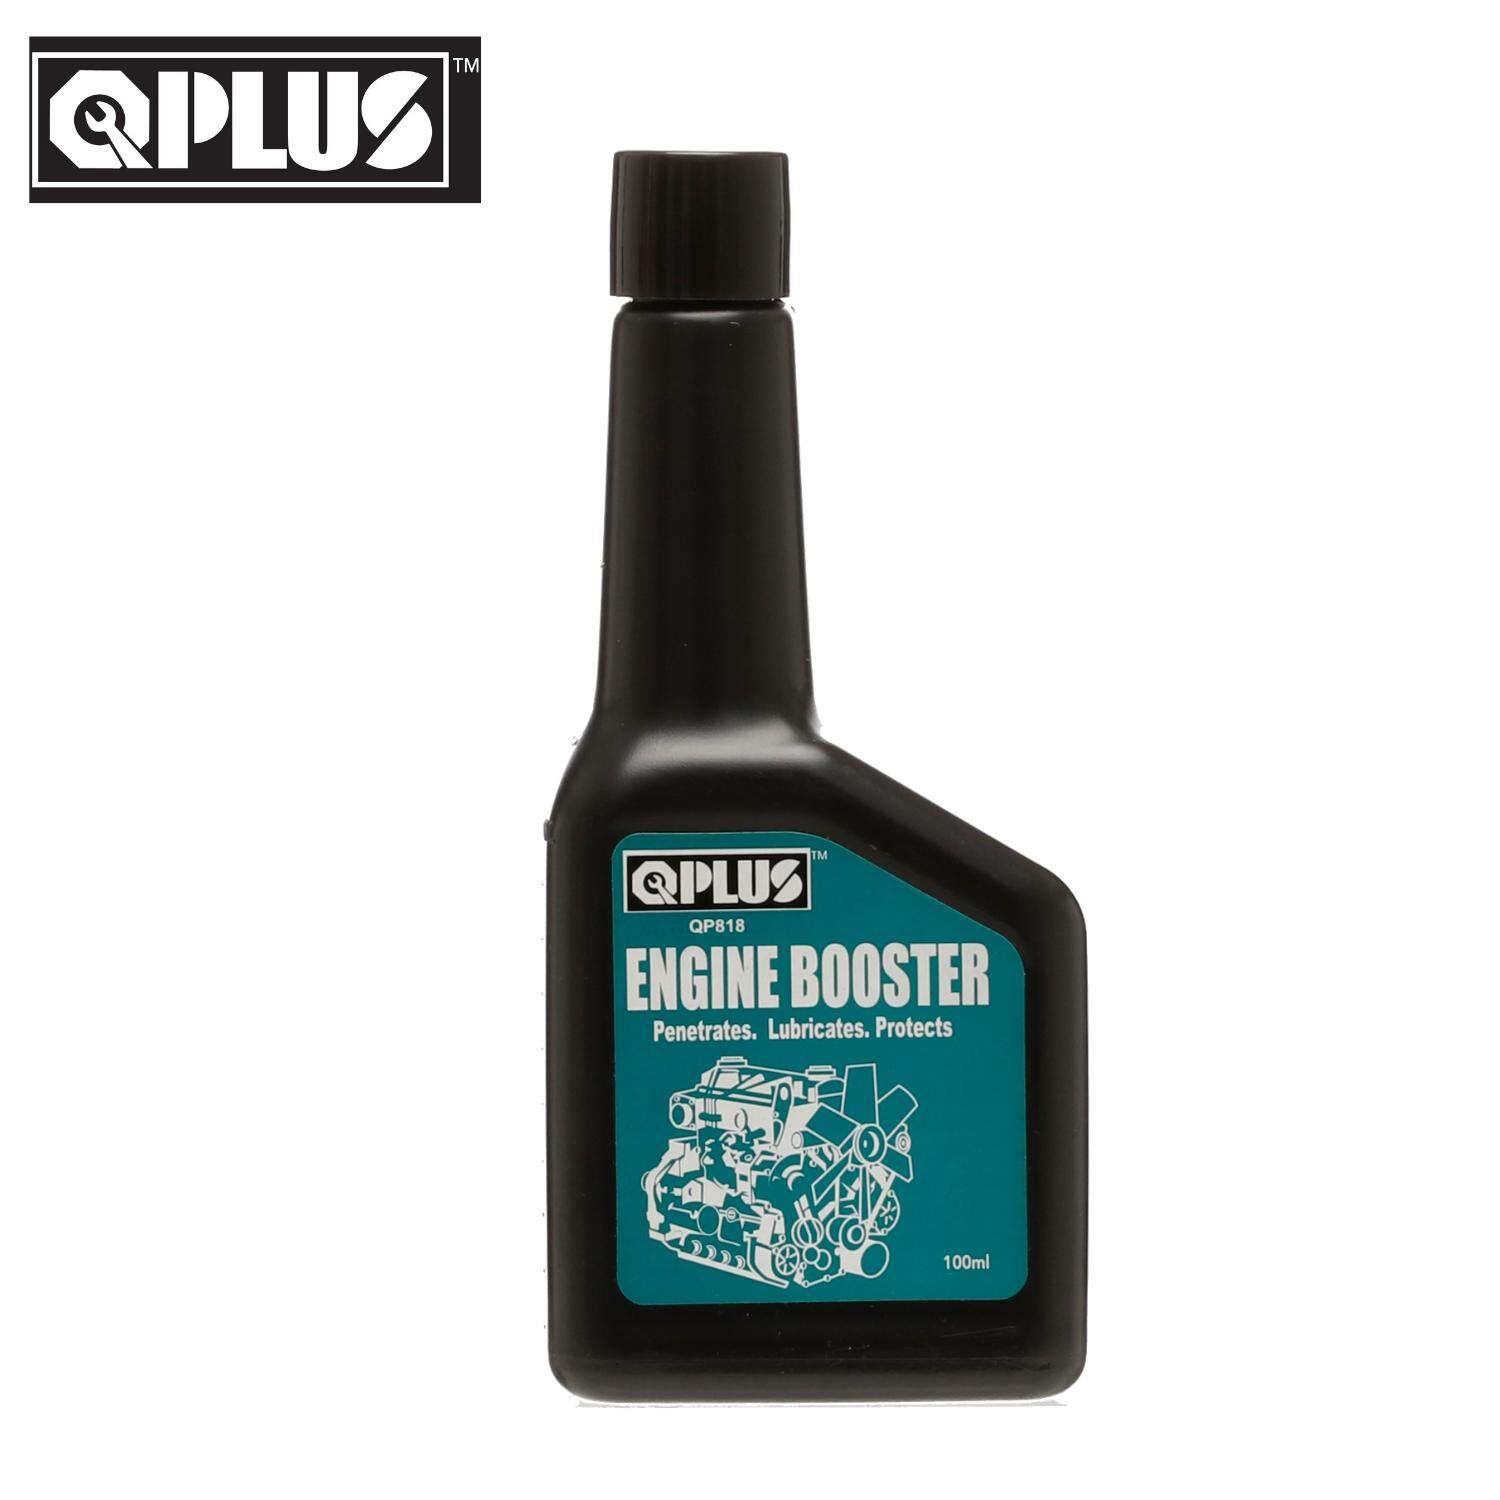 QP818 CAR AND MOTOR ENGINE BOOSTER (100ML) - OIL & LUBRICANT